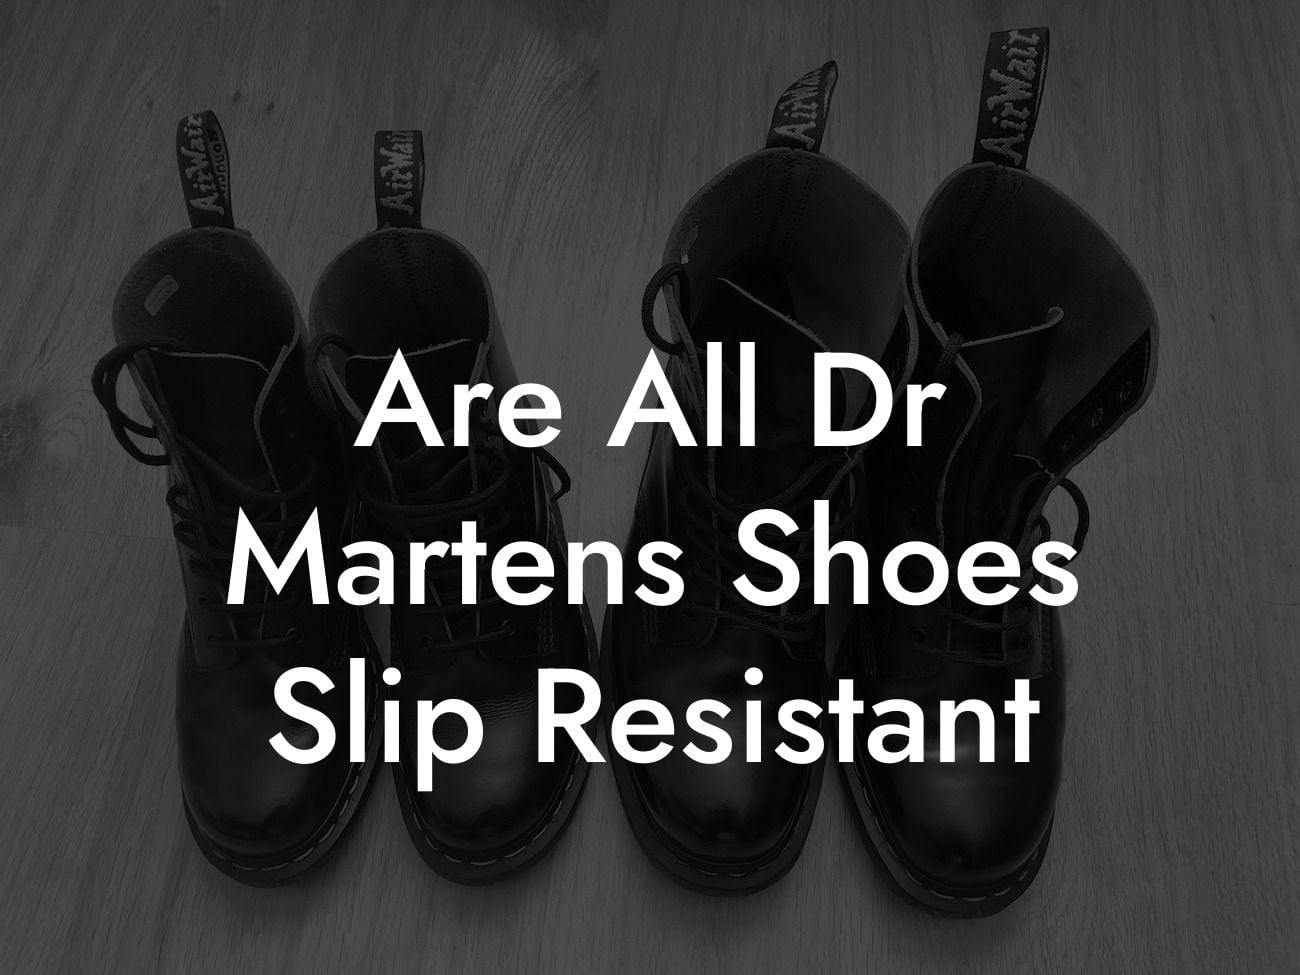 Are All Dr Martens Shoes Slip Resistant